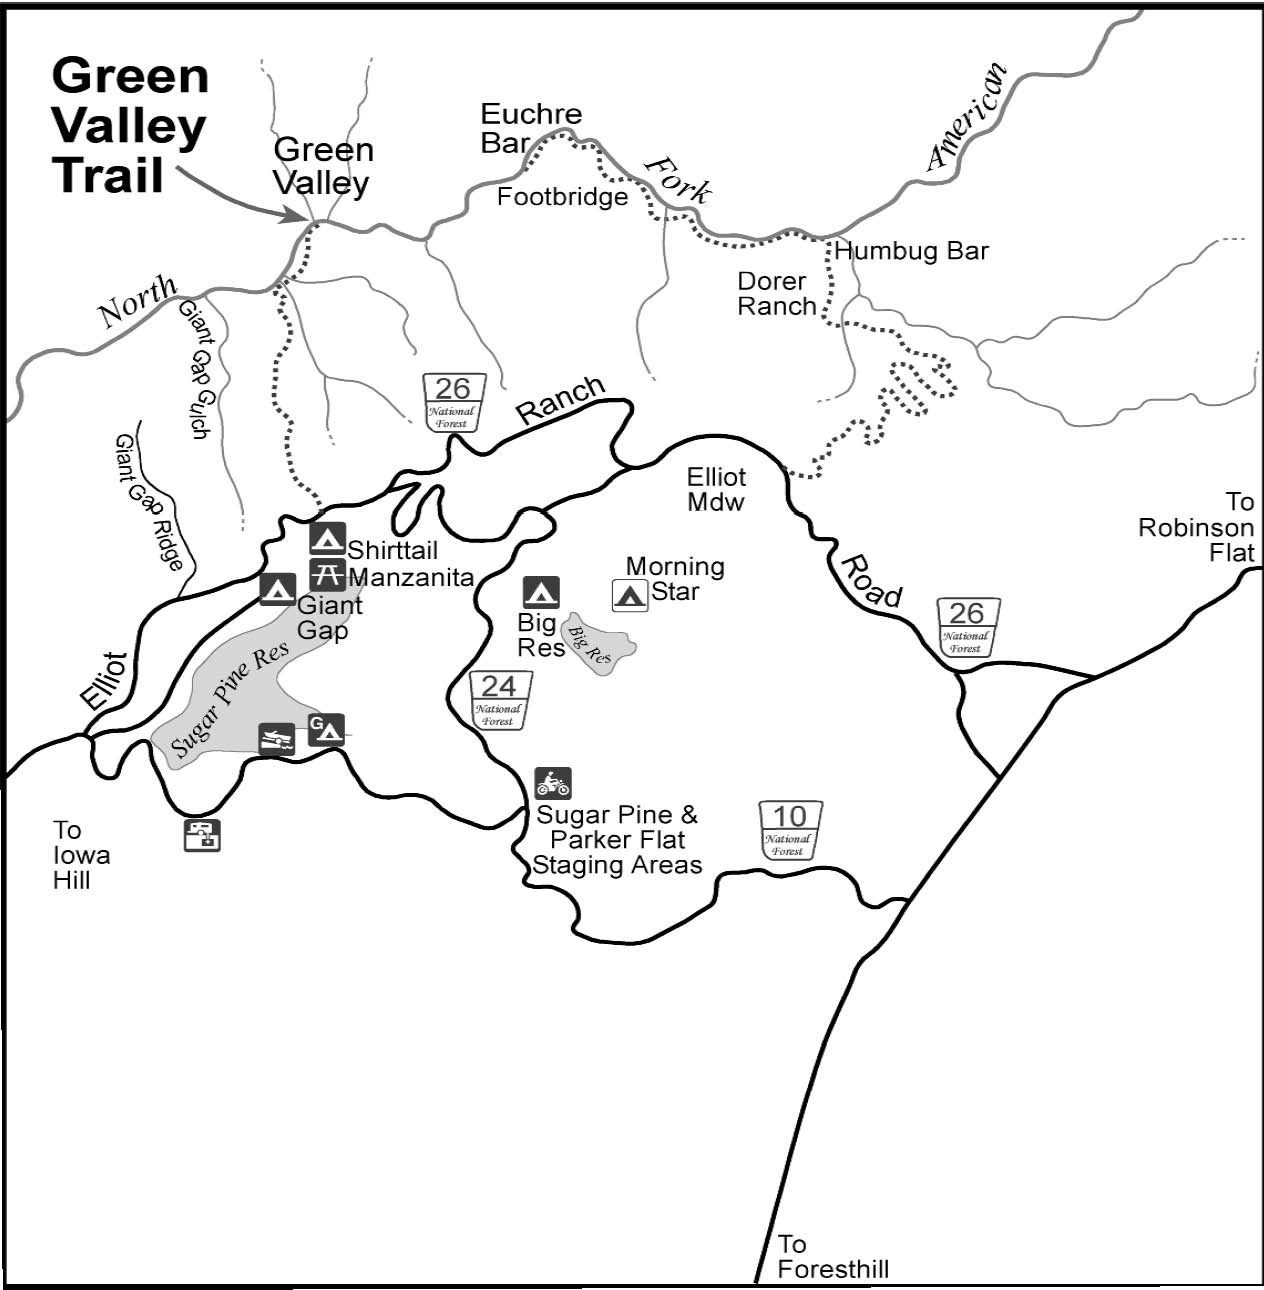 green vally trail map